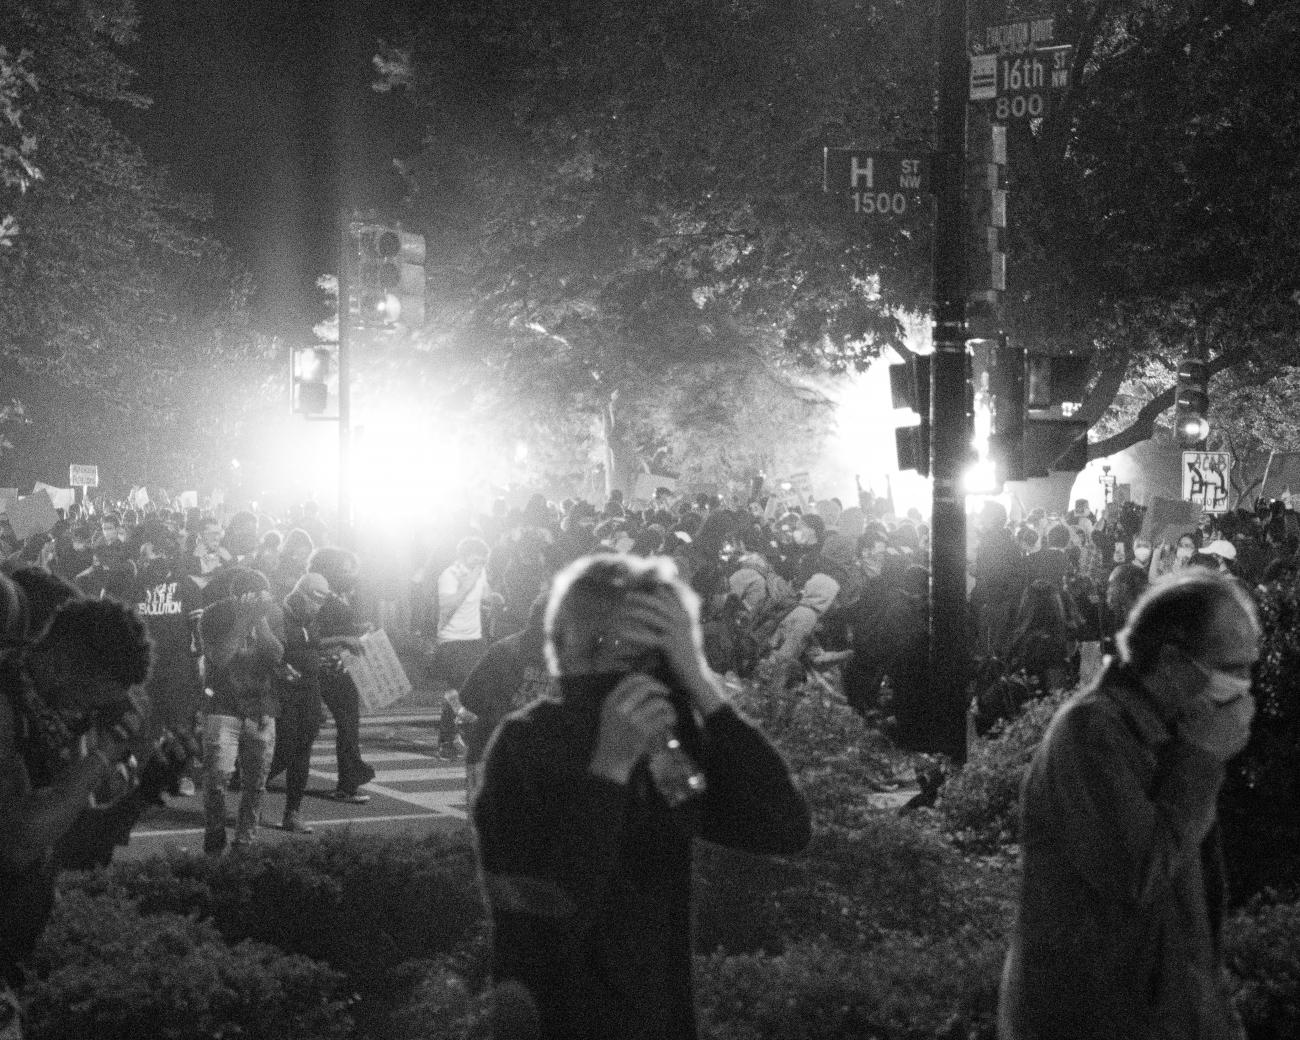 A black and white photo at night, showing large numbers of people walking through smoke with their mouths covered